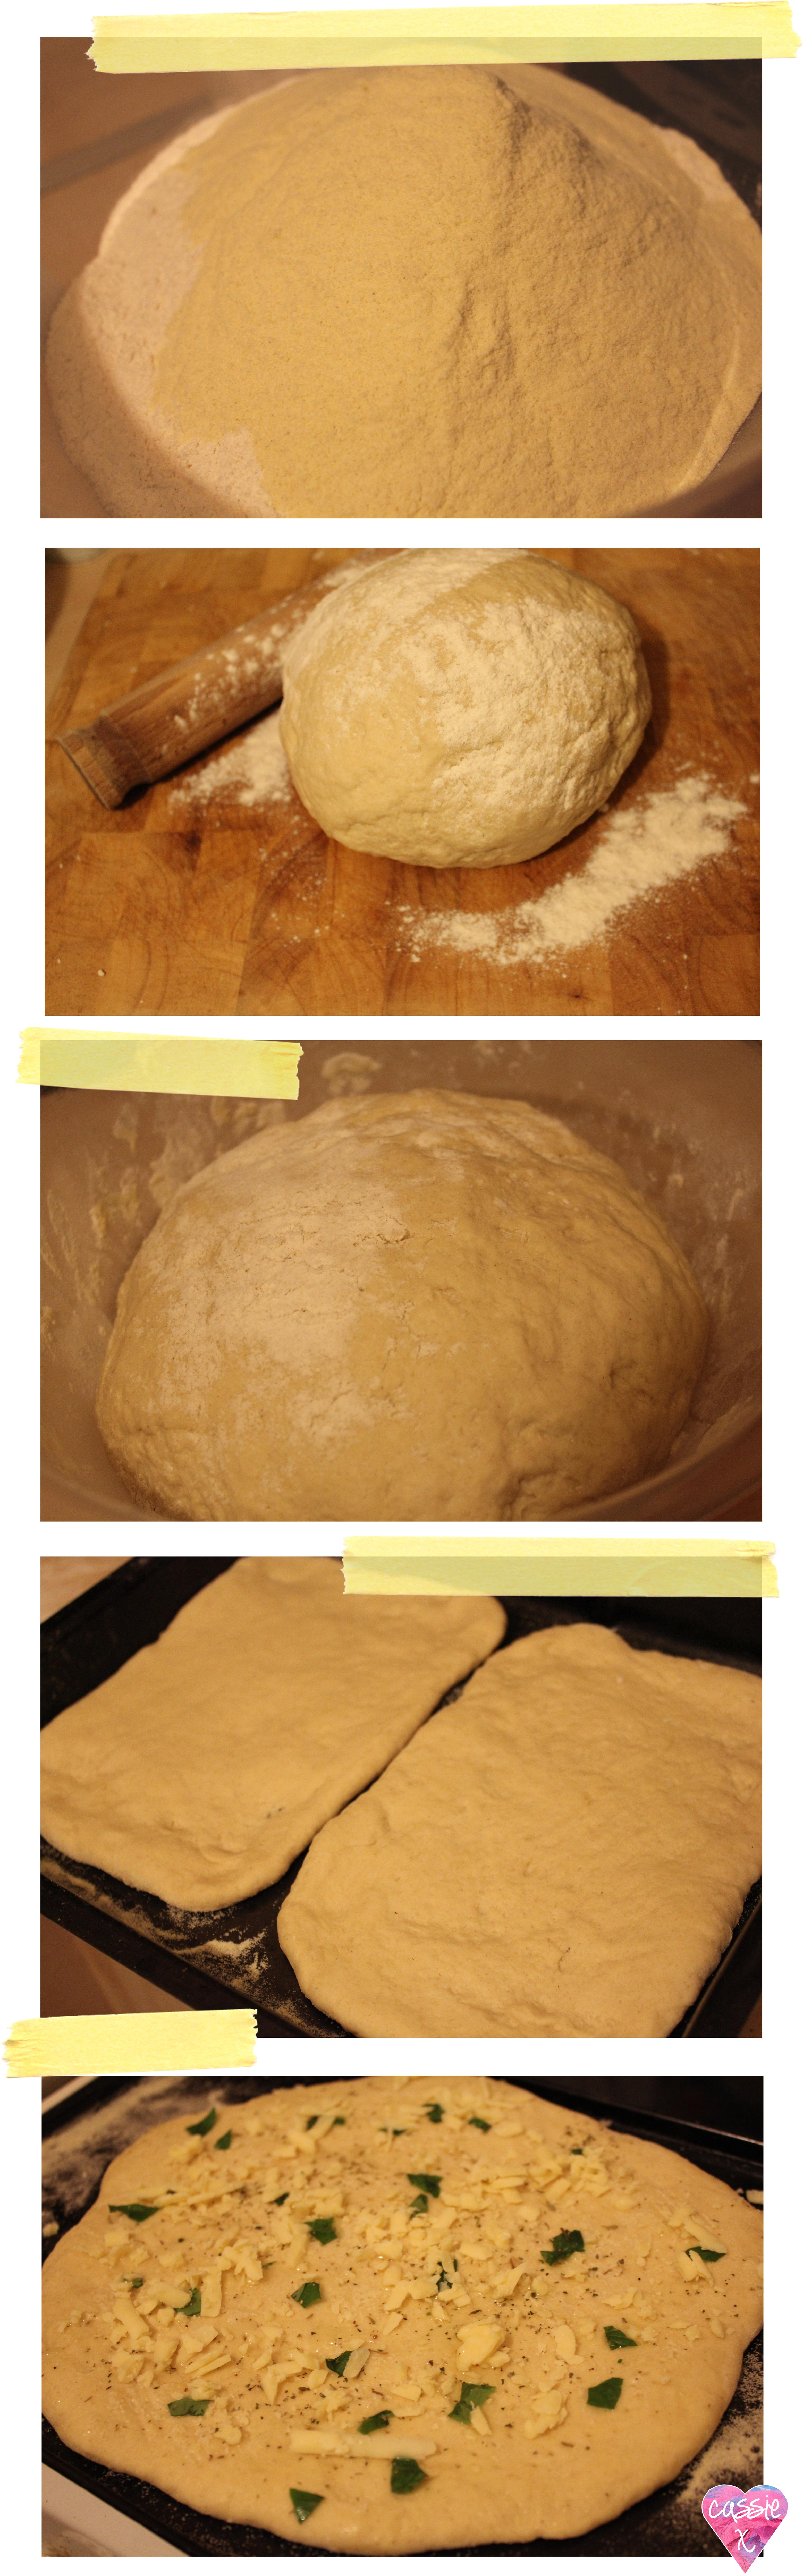 Pieday Friday homemade pizza dough recipe for saturday night takeaway meal